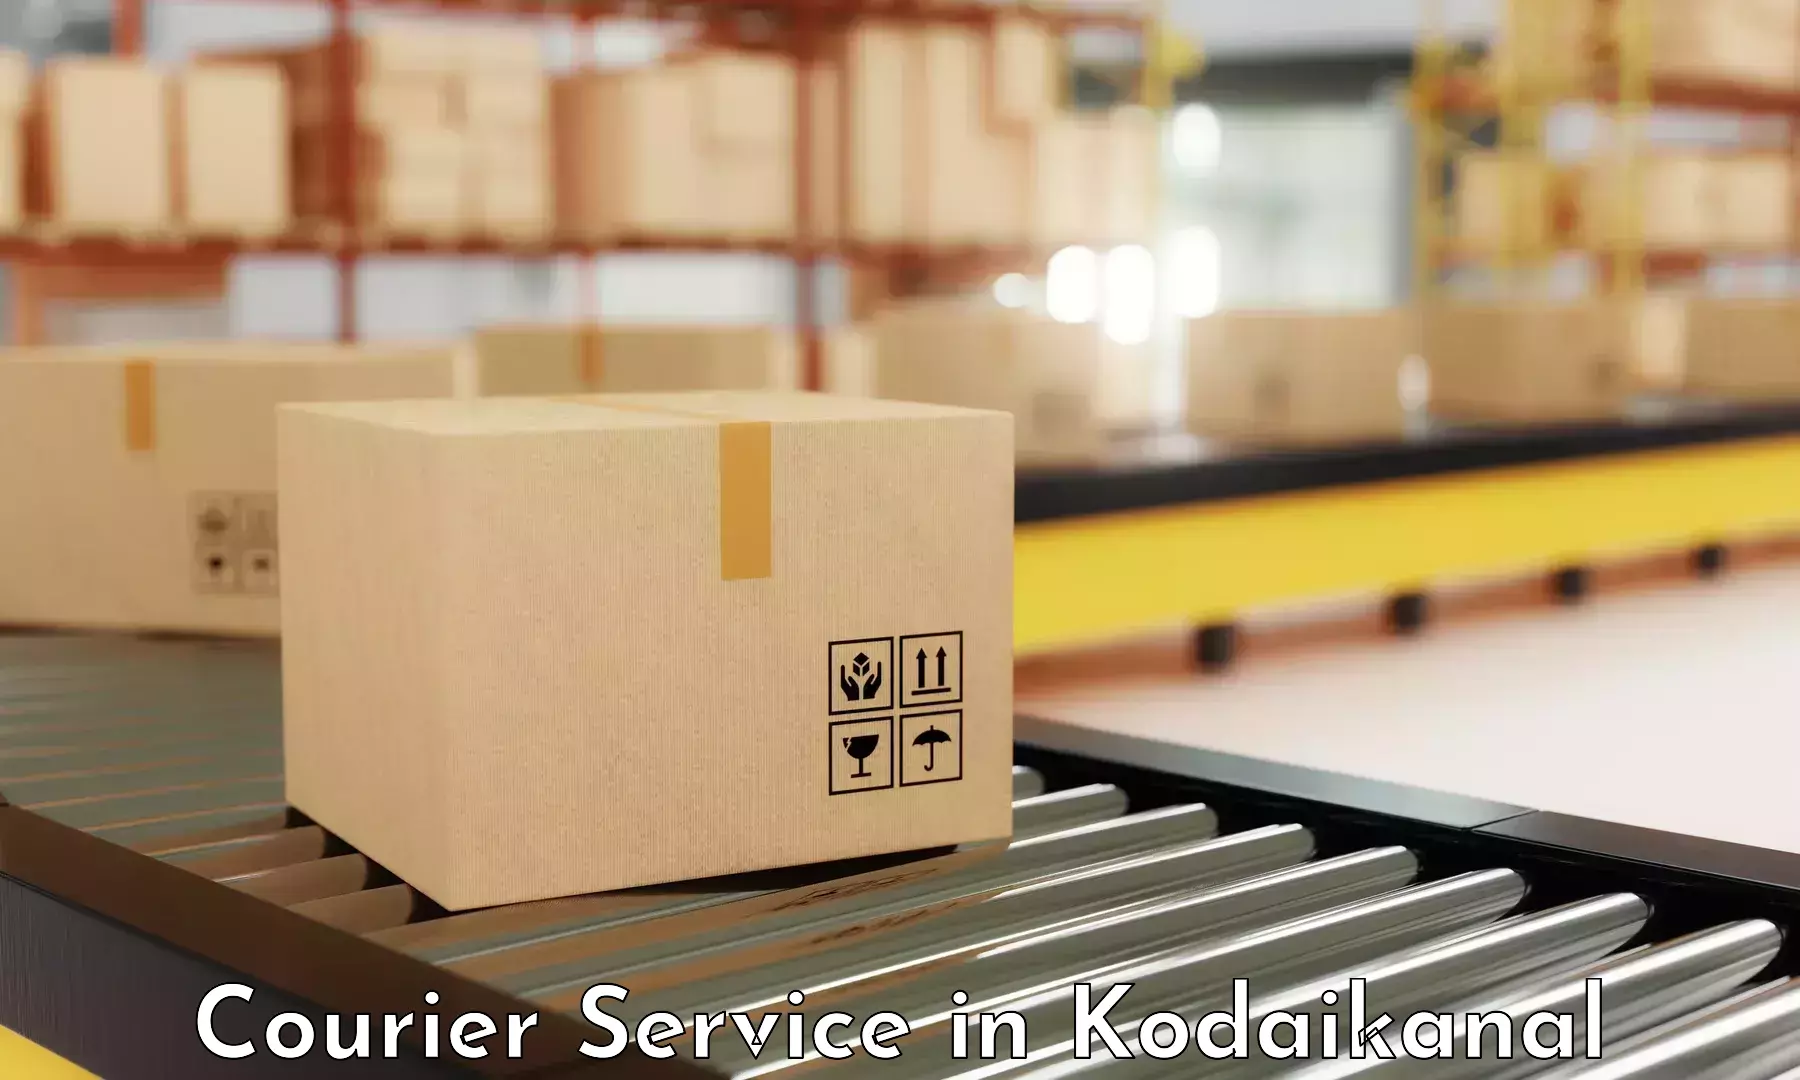 Overnight delivery services in Kodaikanal